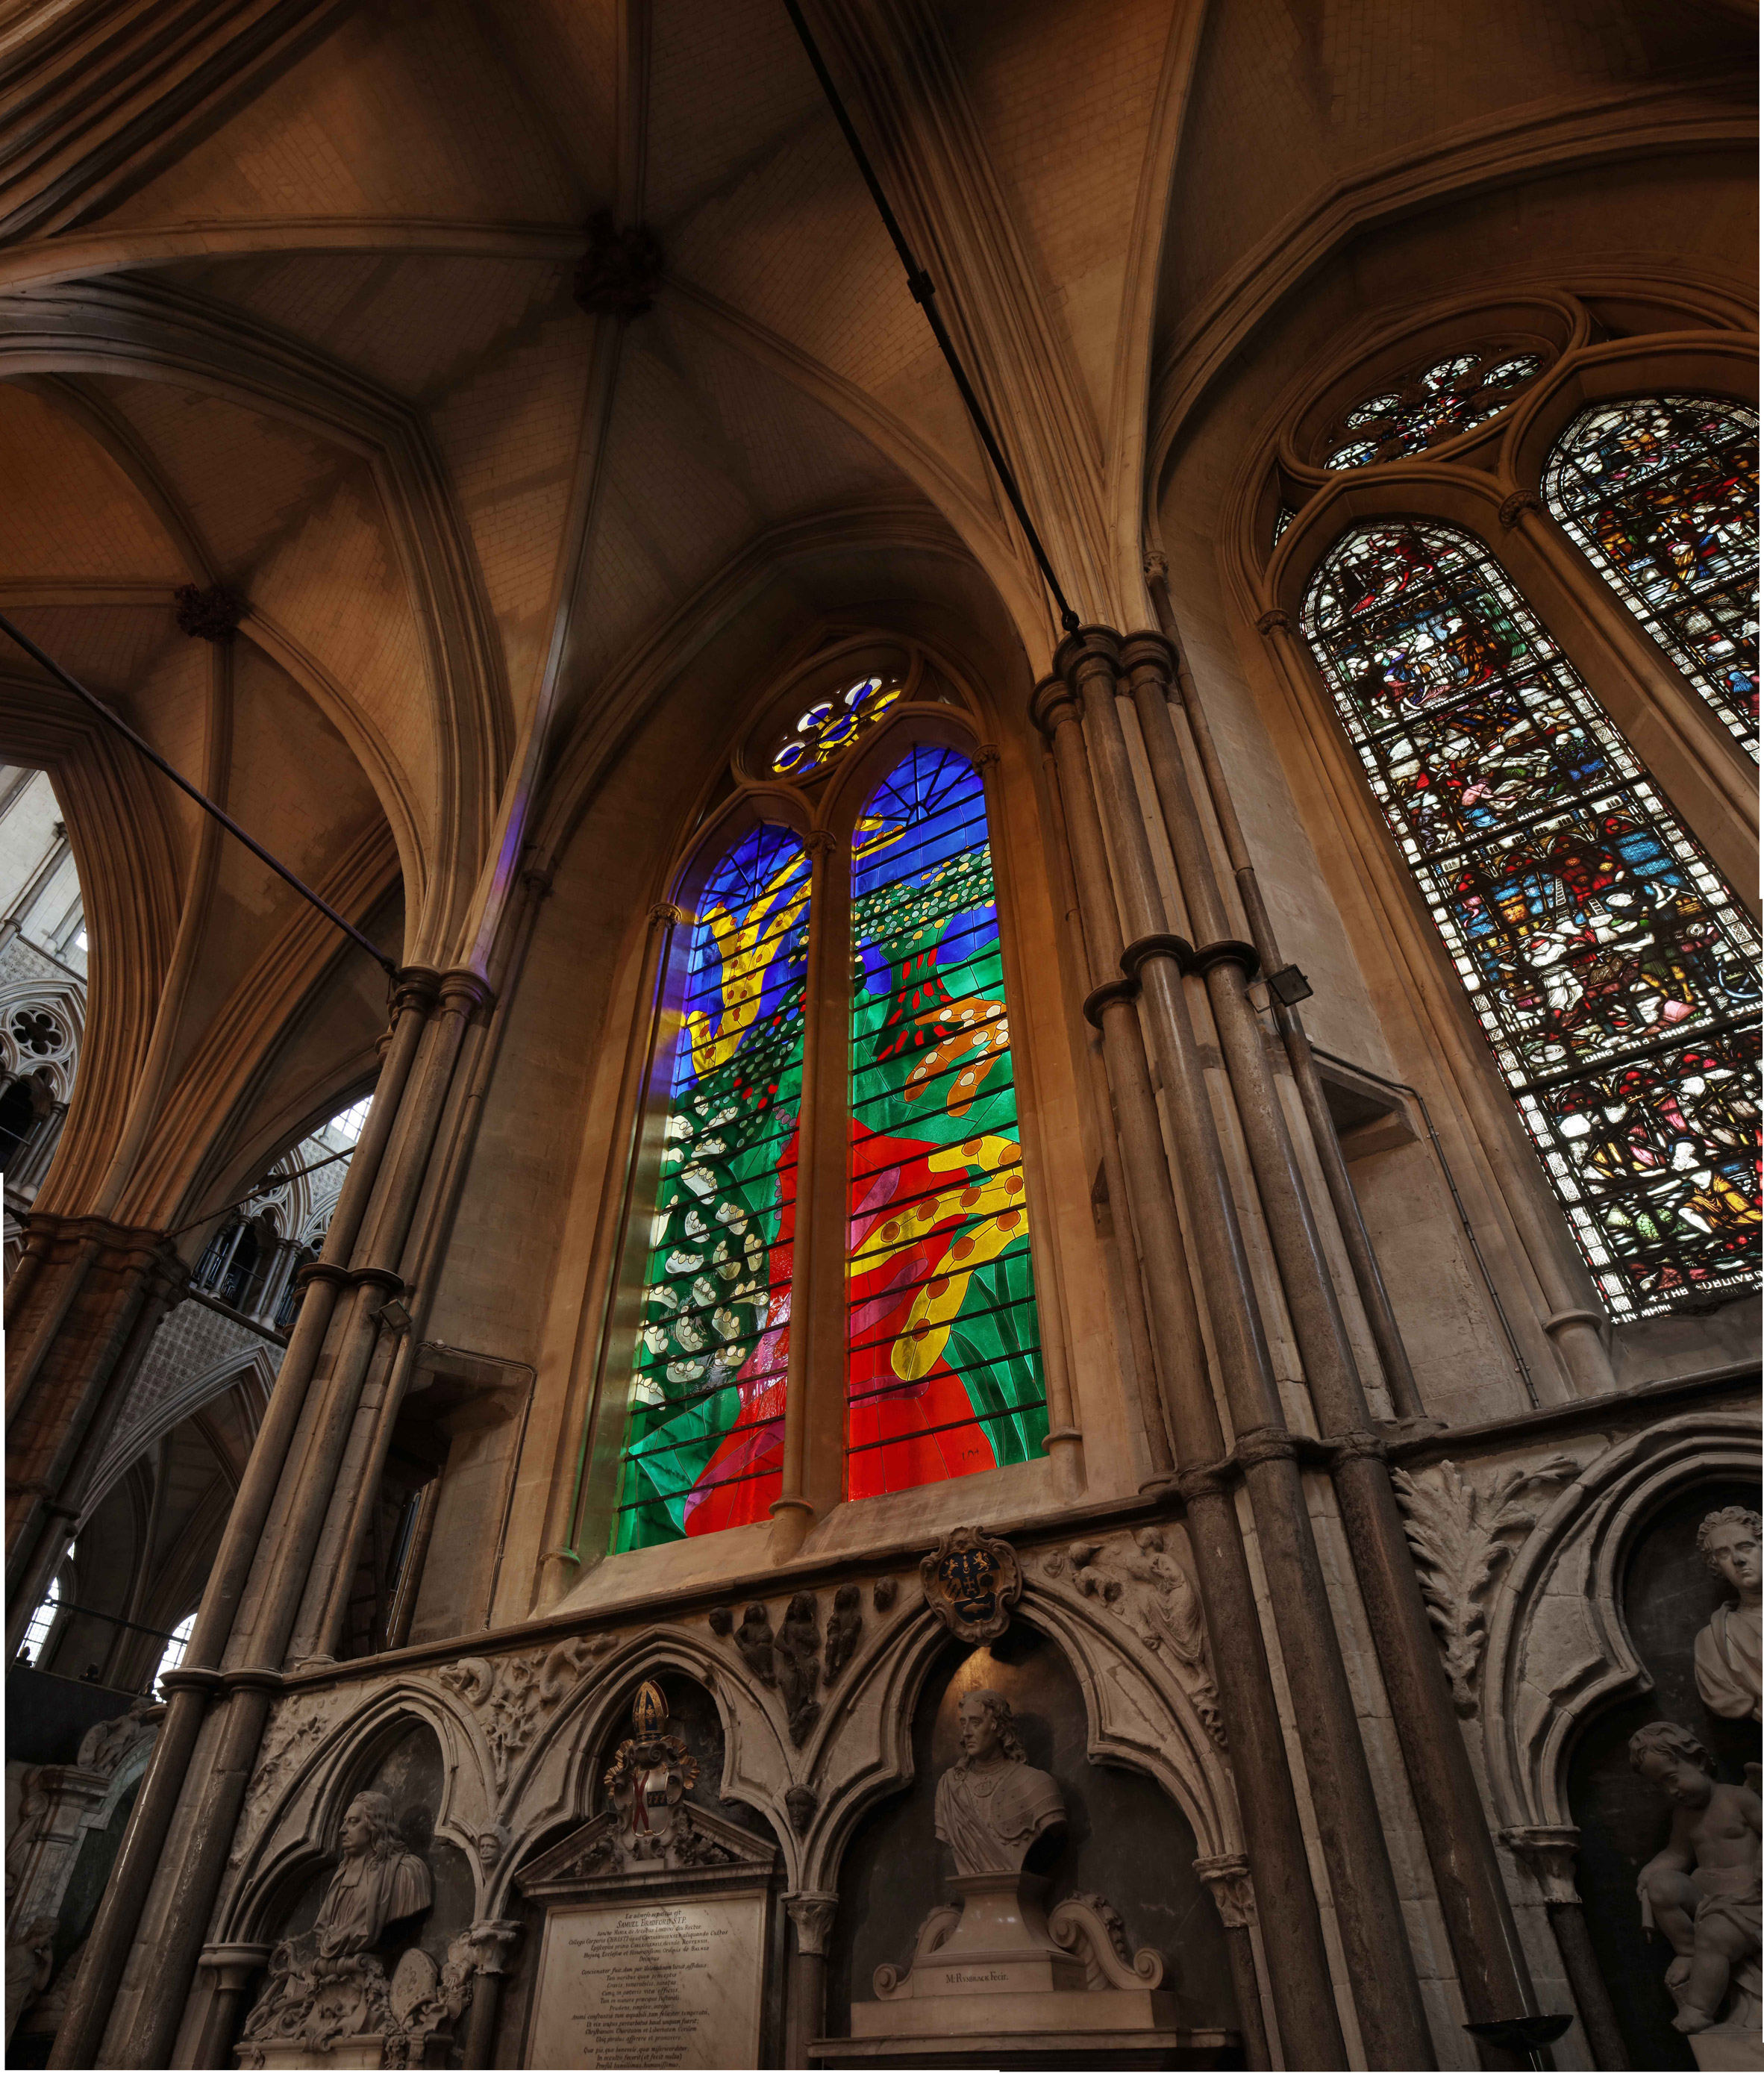 David Hockney reveals iPad-designed stained-glass window in Westminster Abbey